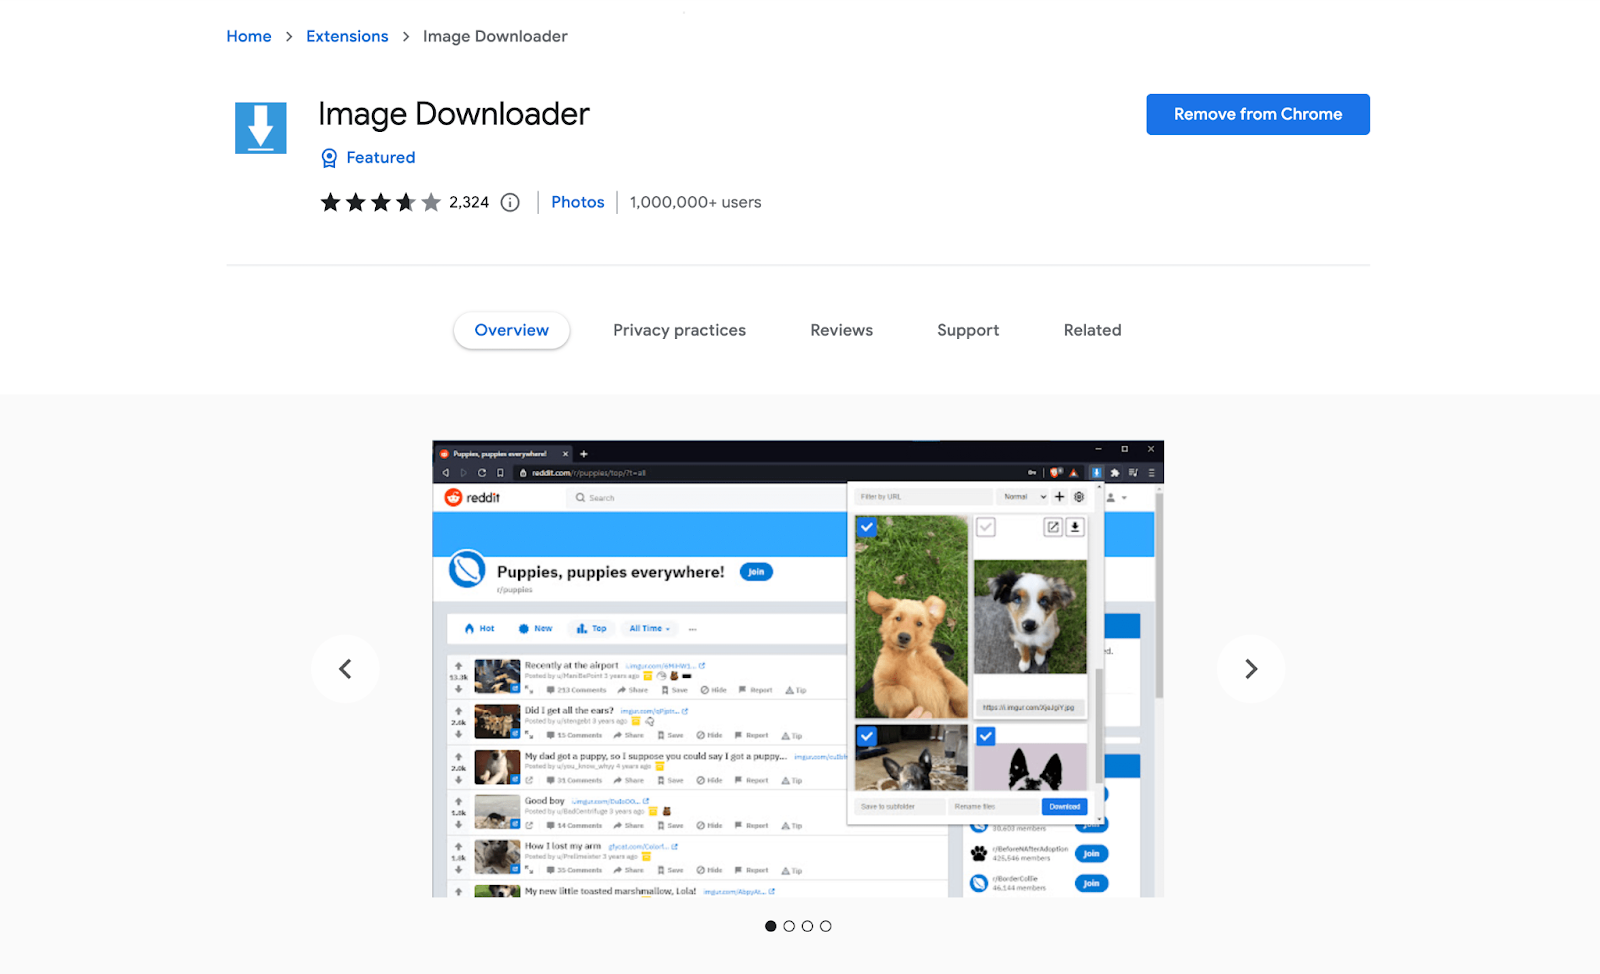 Screenshot of Image downloader chrome extension for any user